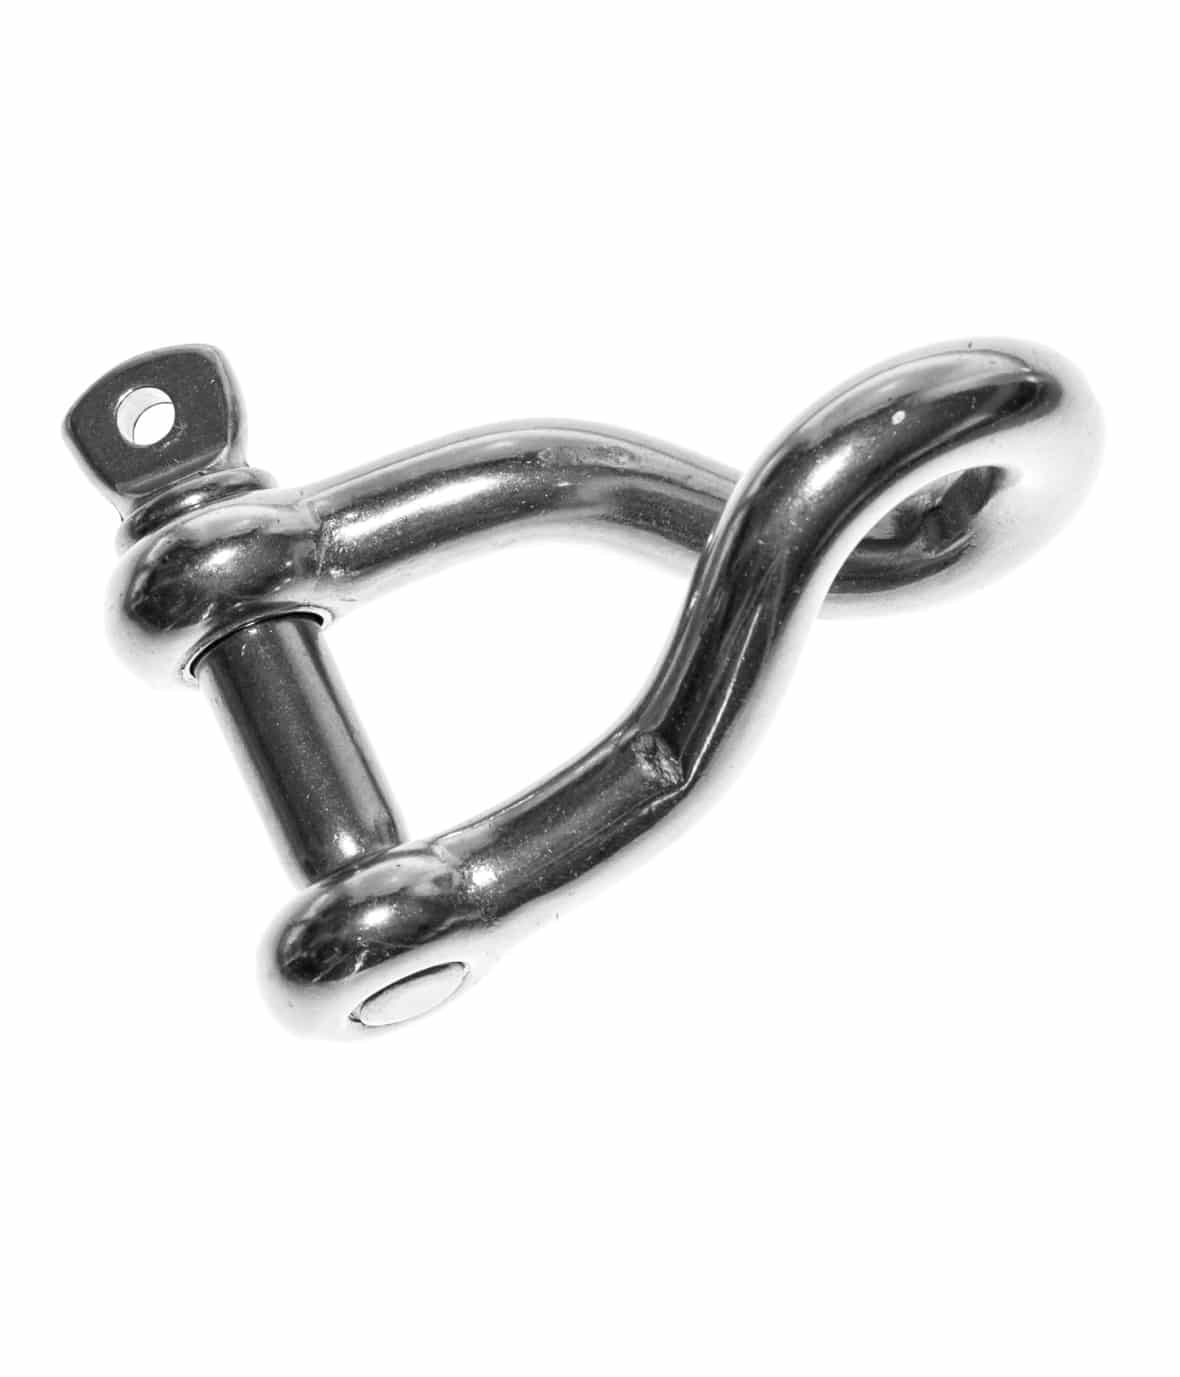 twisted shackle for rigging